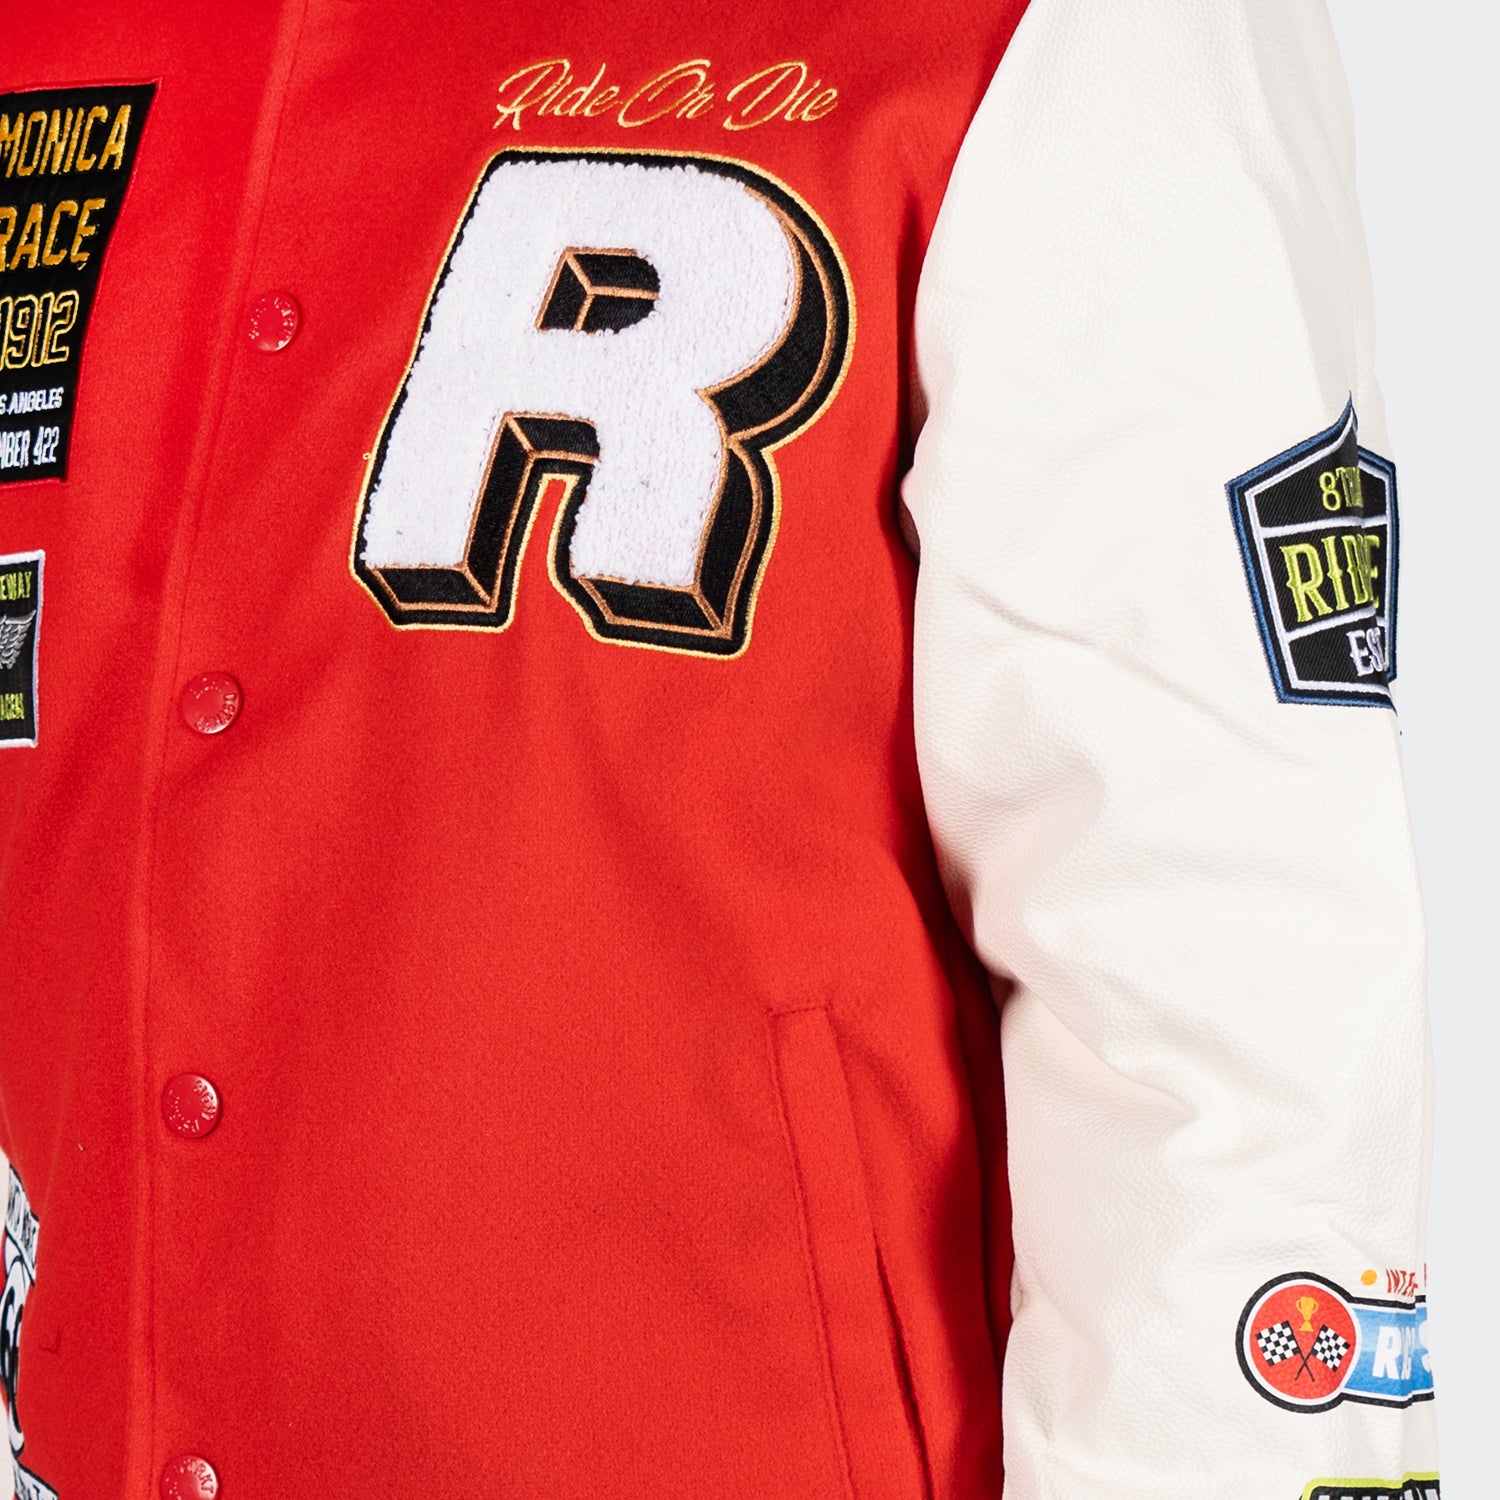 Race Die or Chicago Varsity | Ride City Jacket Red TMTY Sports Road